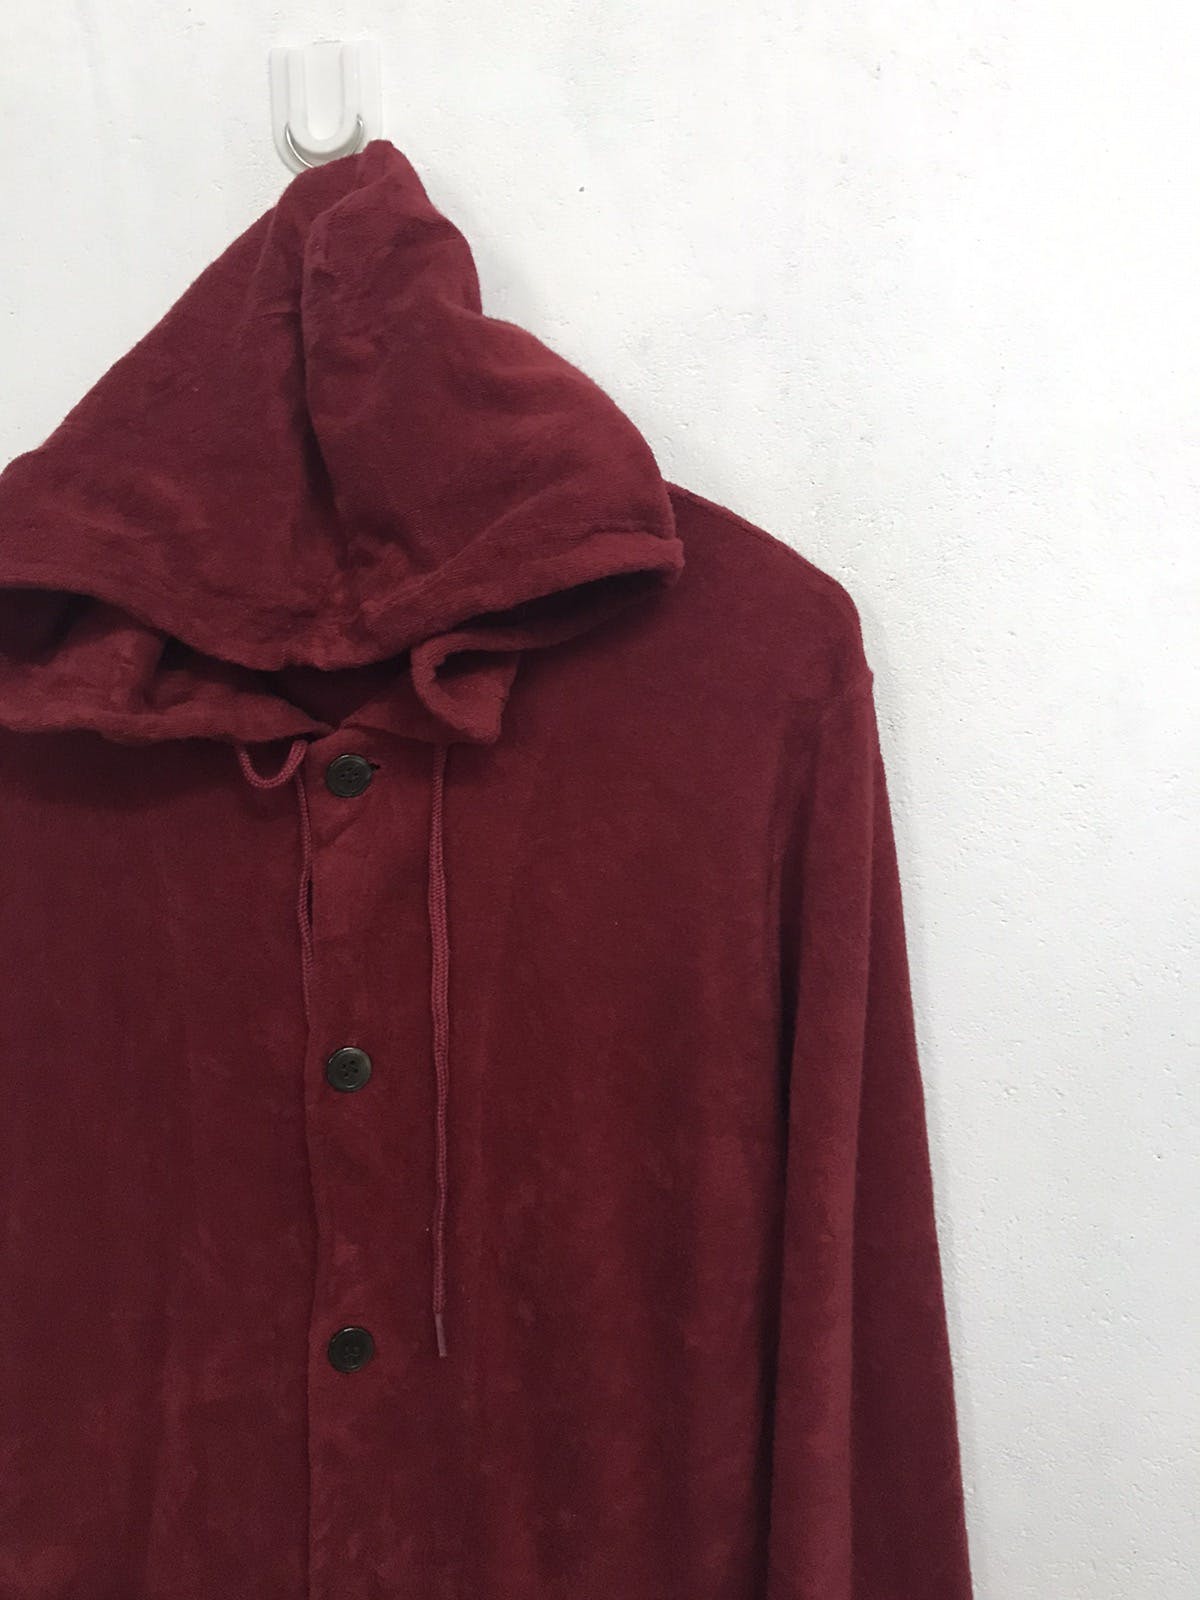 Paul Smith Button Up Hoodie Jacket Made in Japan - 3